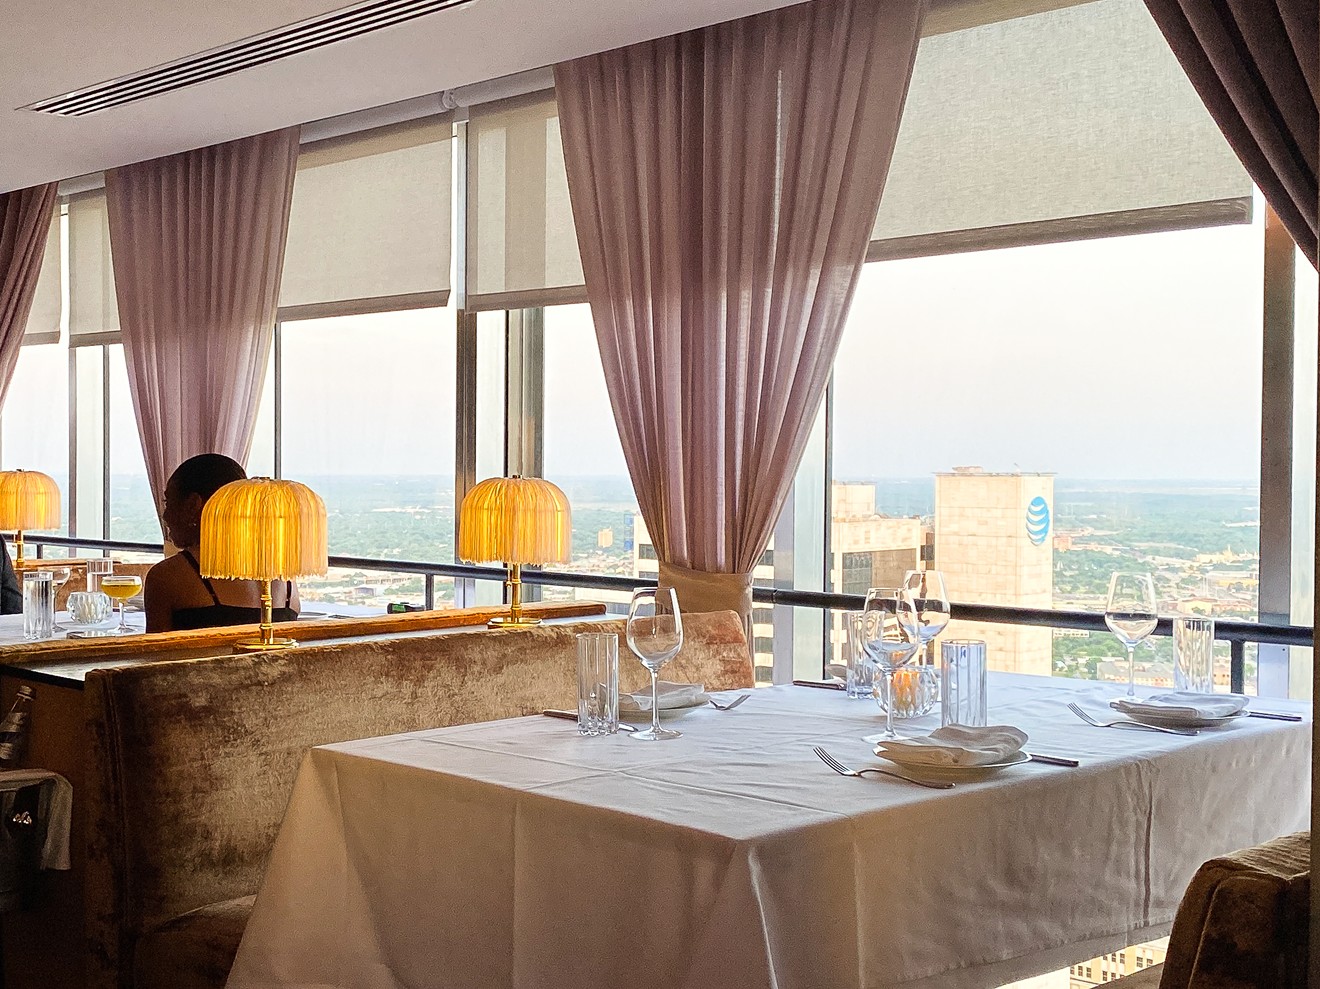 At Monarch, the spectacular view from the 49th floor will be stellar on New Year's Eve.